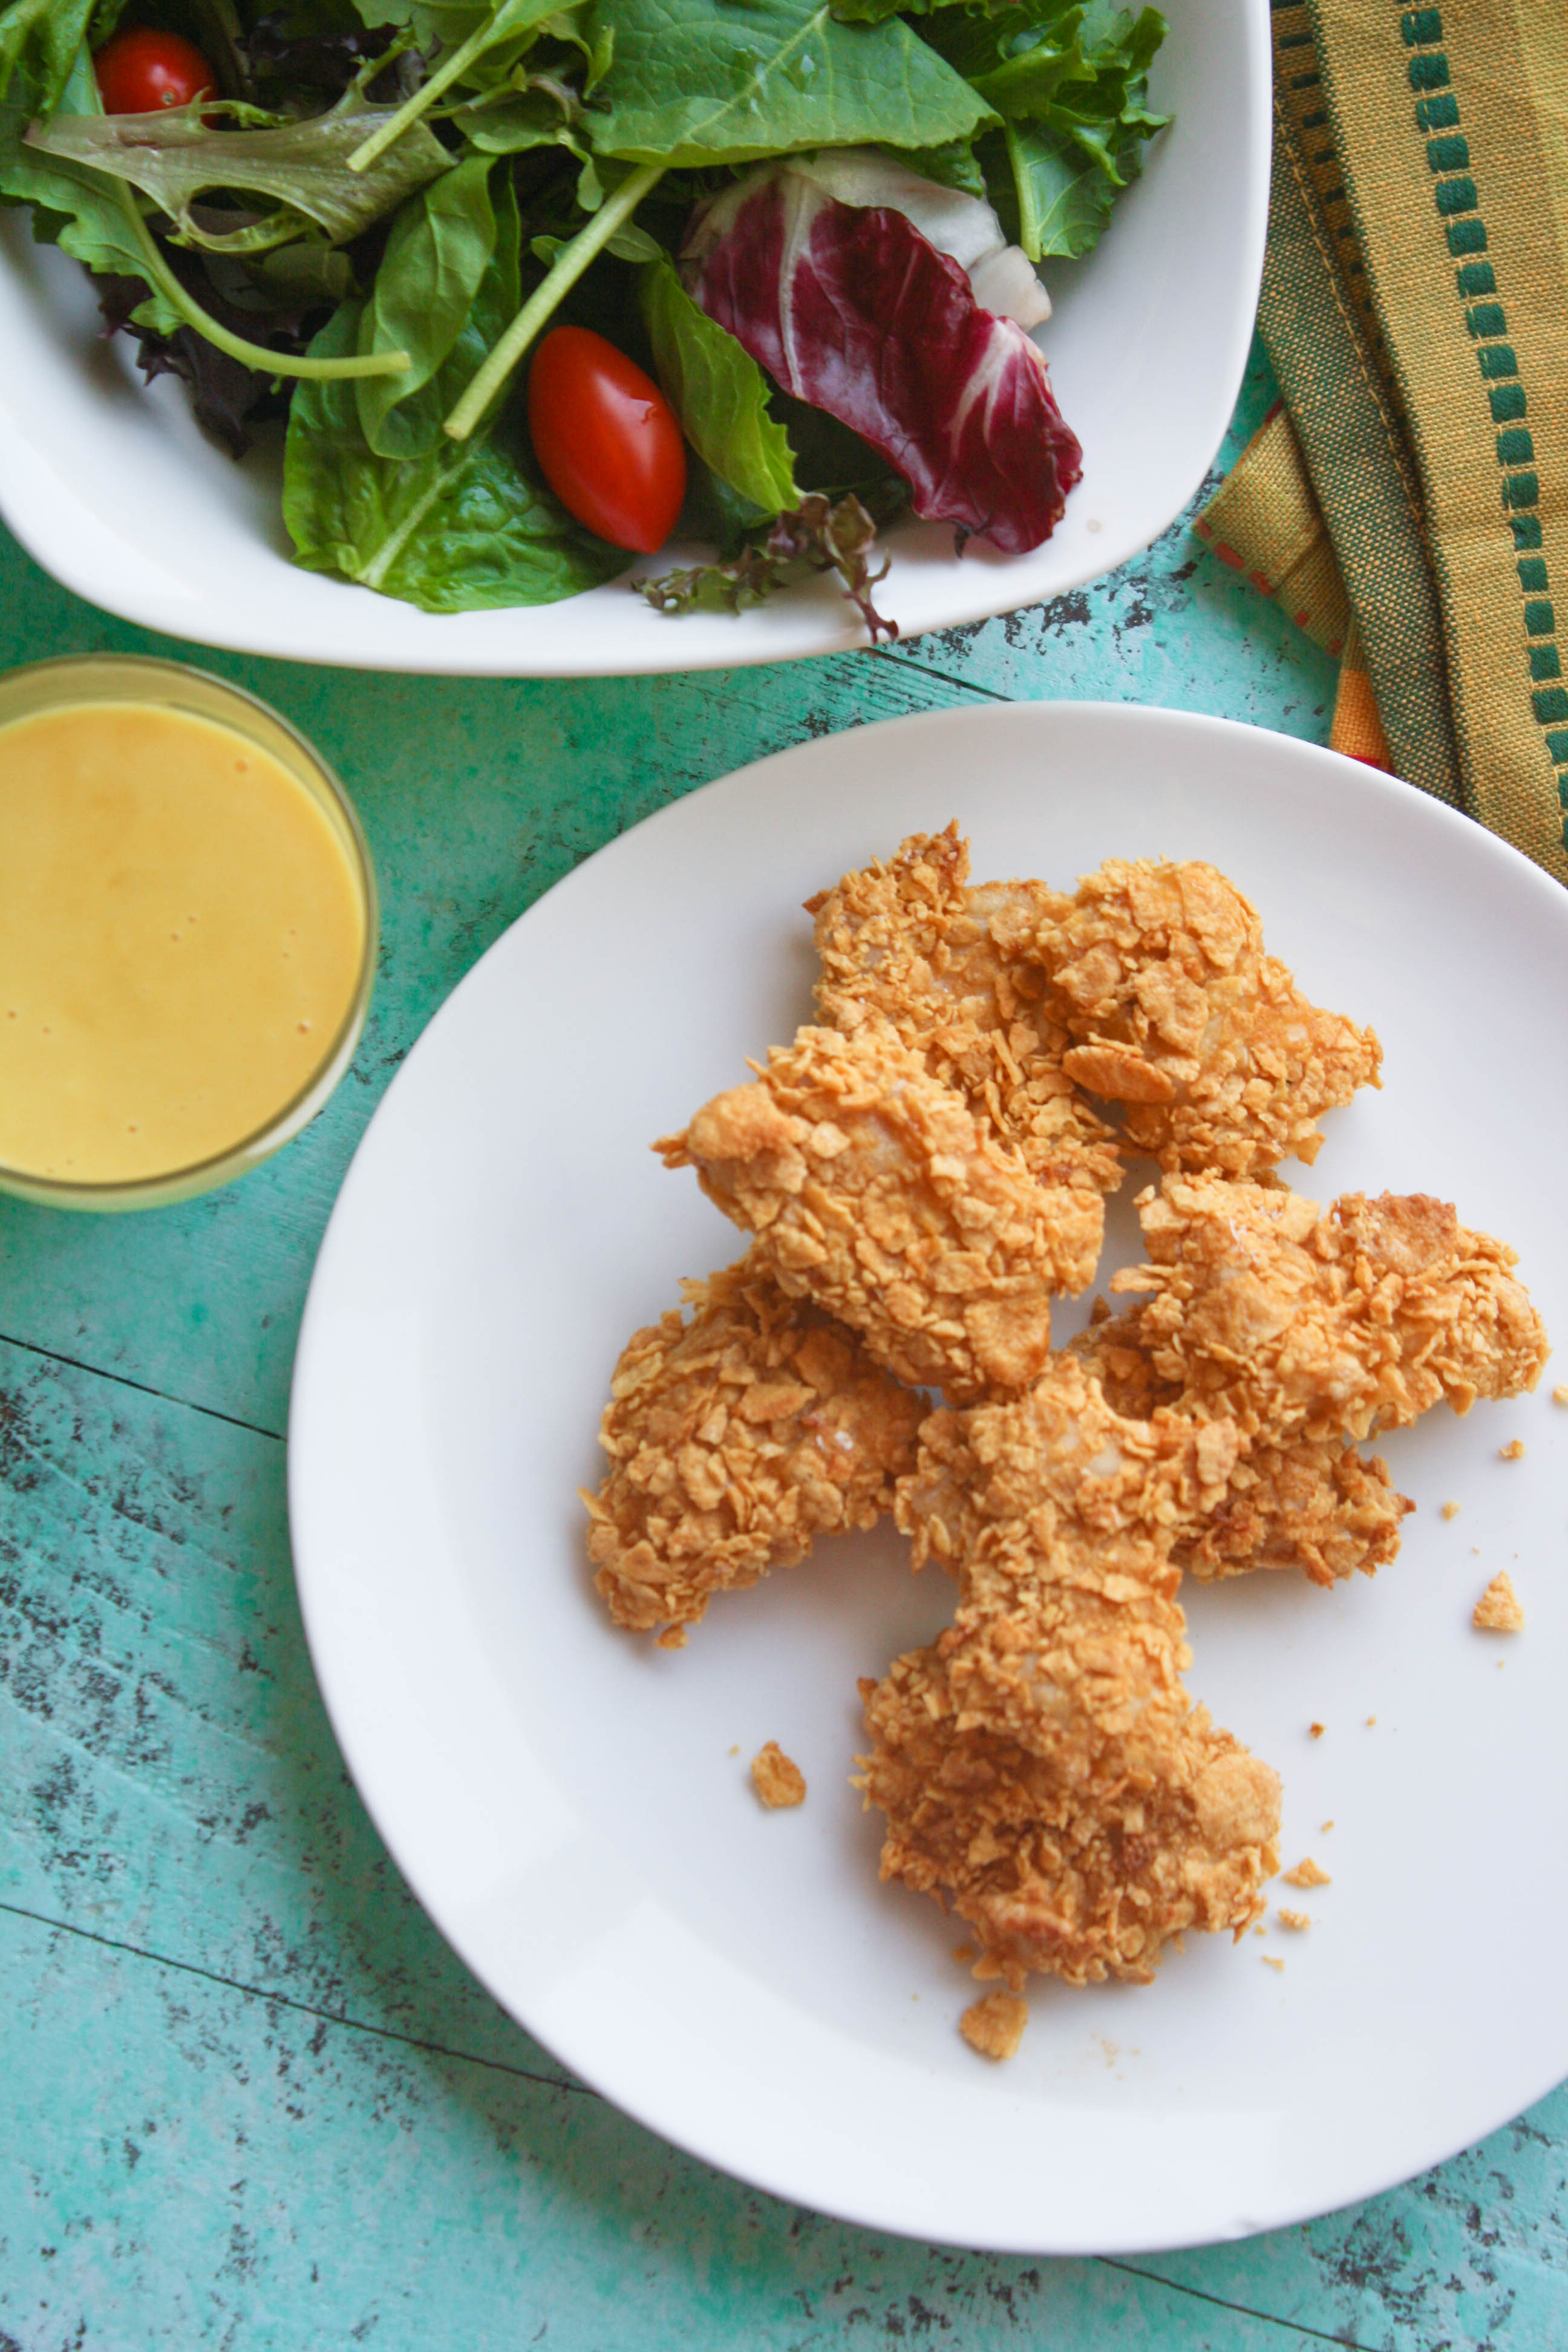 Crunchy Oven Baked Chicken Nuggets with Honey Mustard Sauce makes a fun meal. Try them for dinner soon!